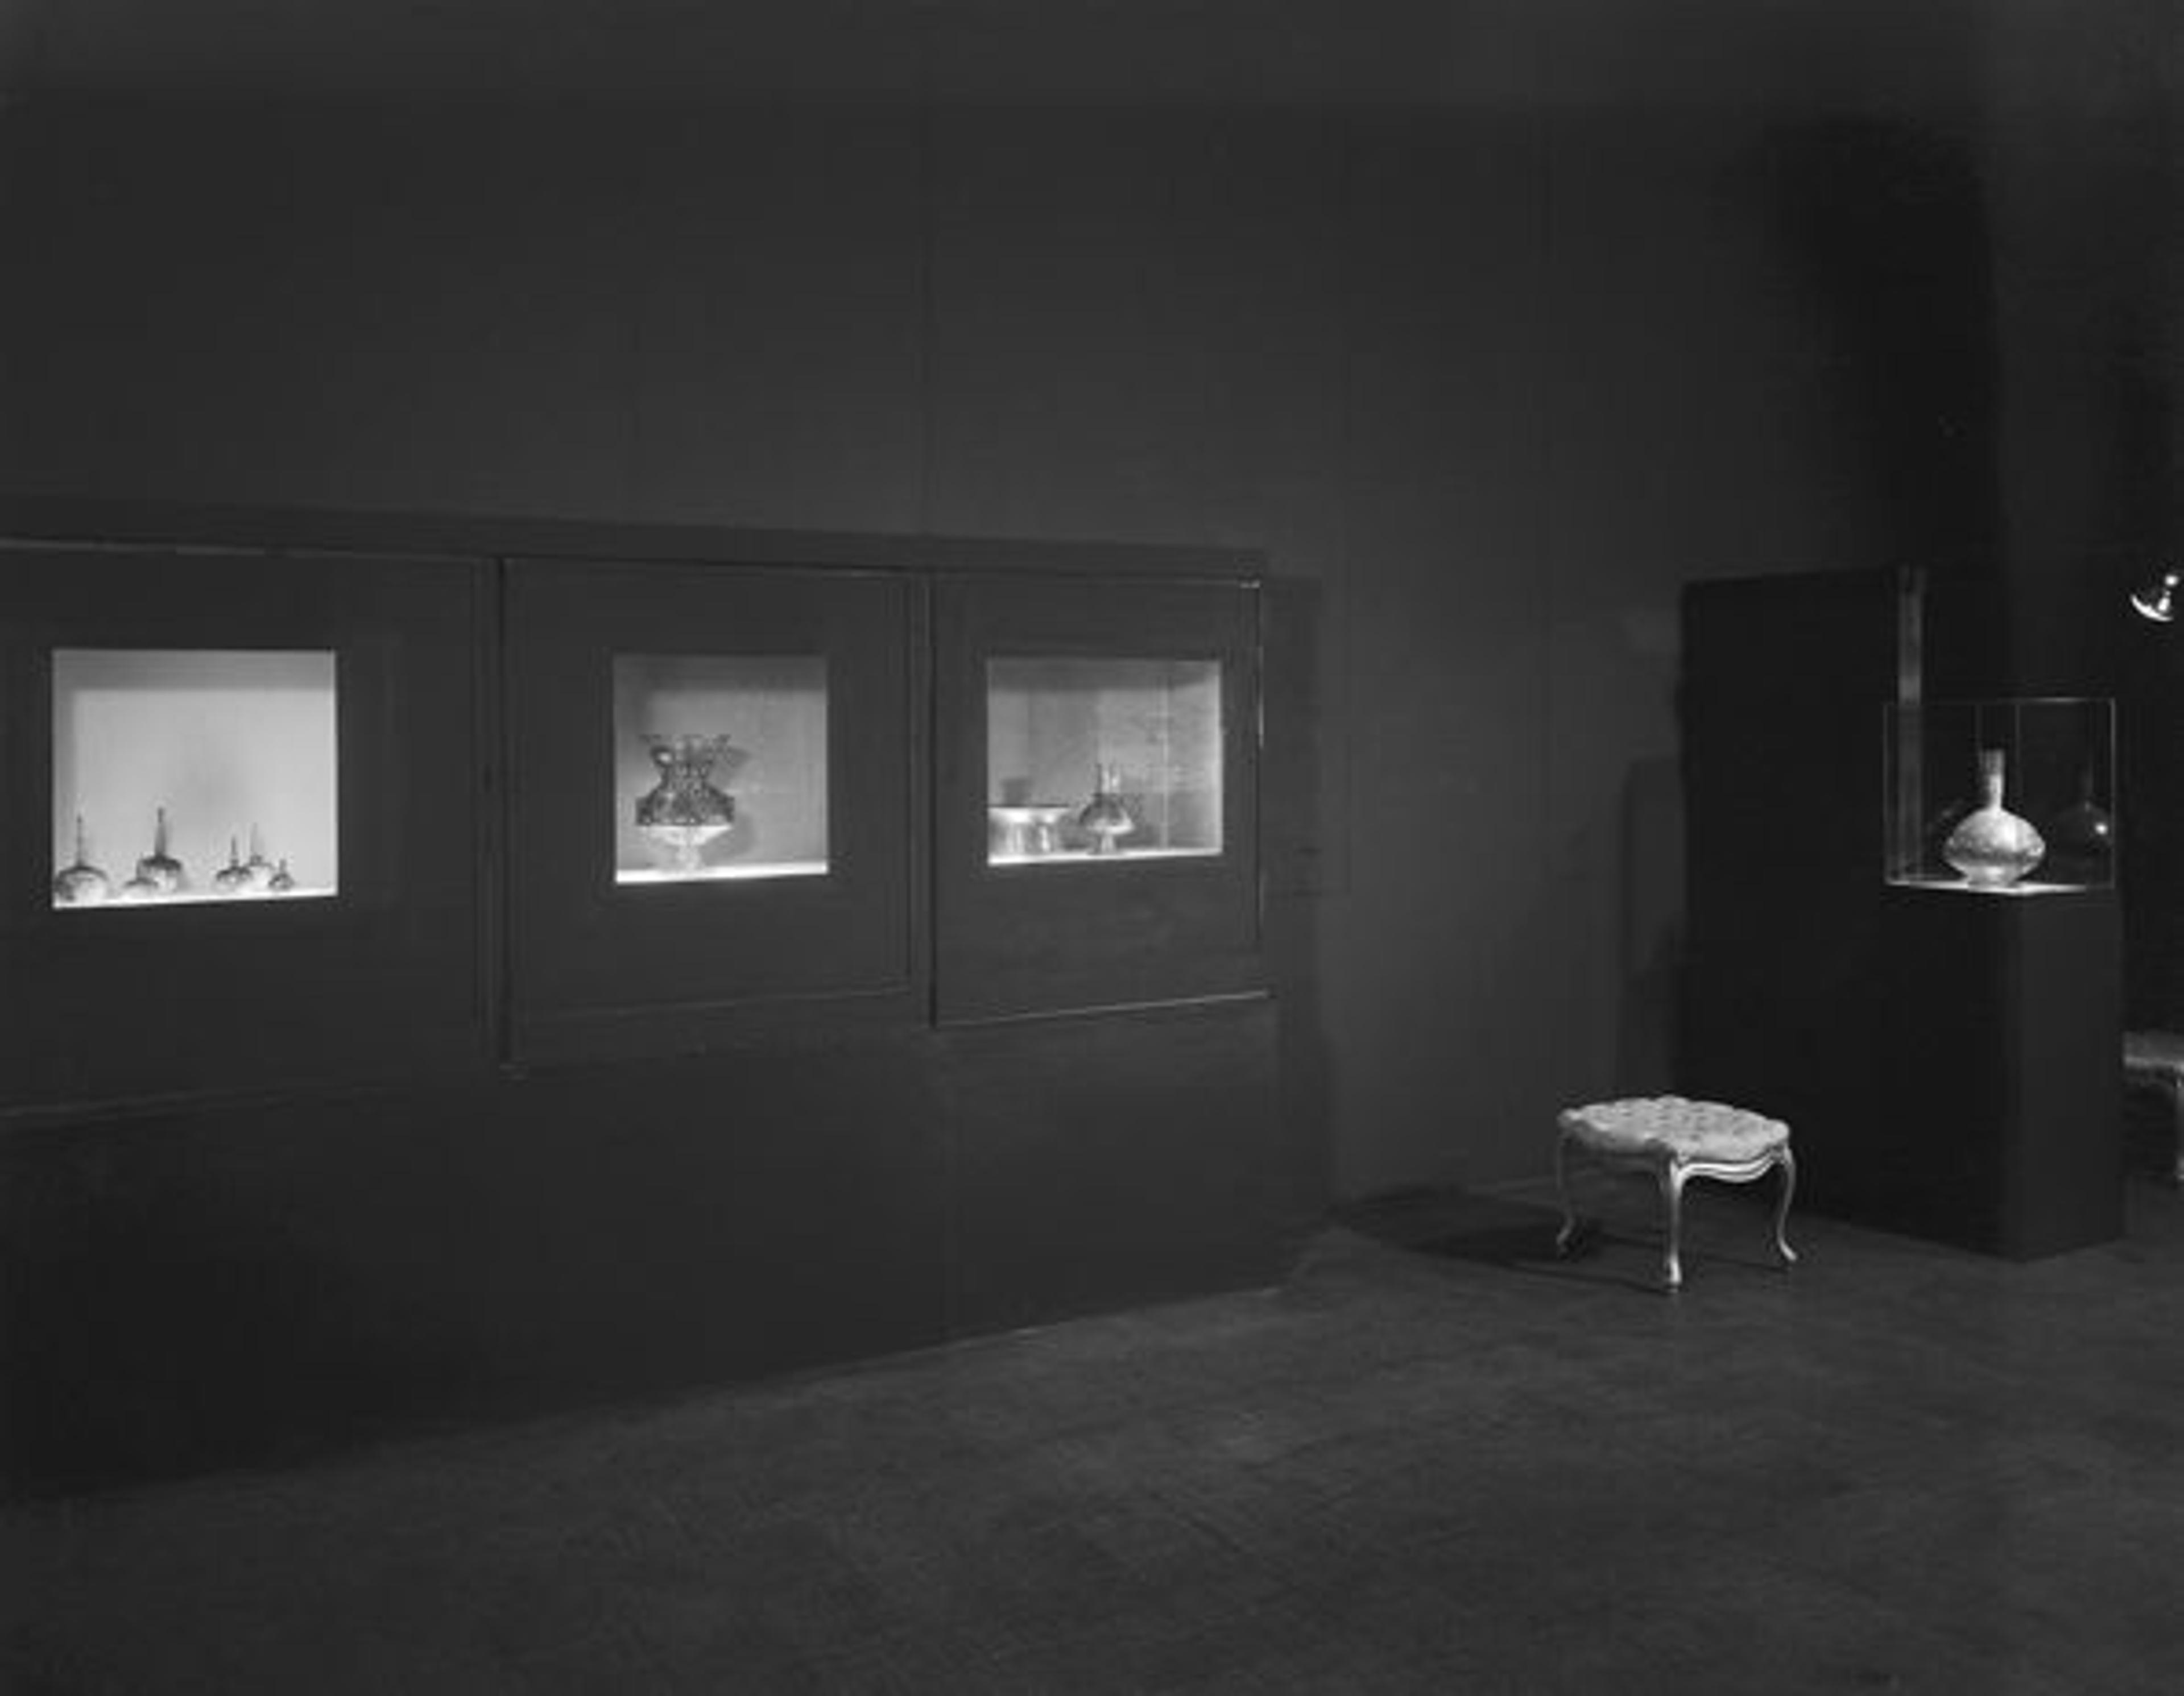 "Enameled Islamic Glass of the XIII and XIV Centuries" Exhibition, 1944